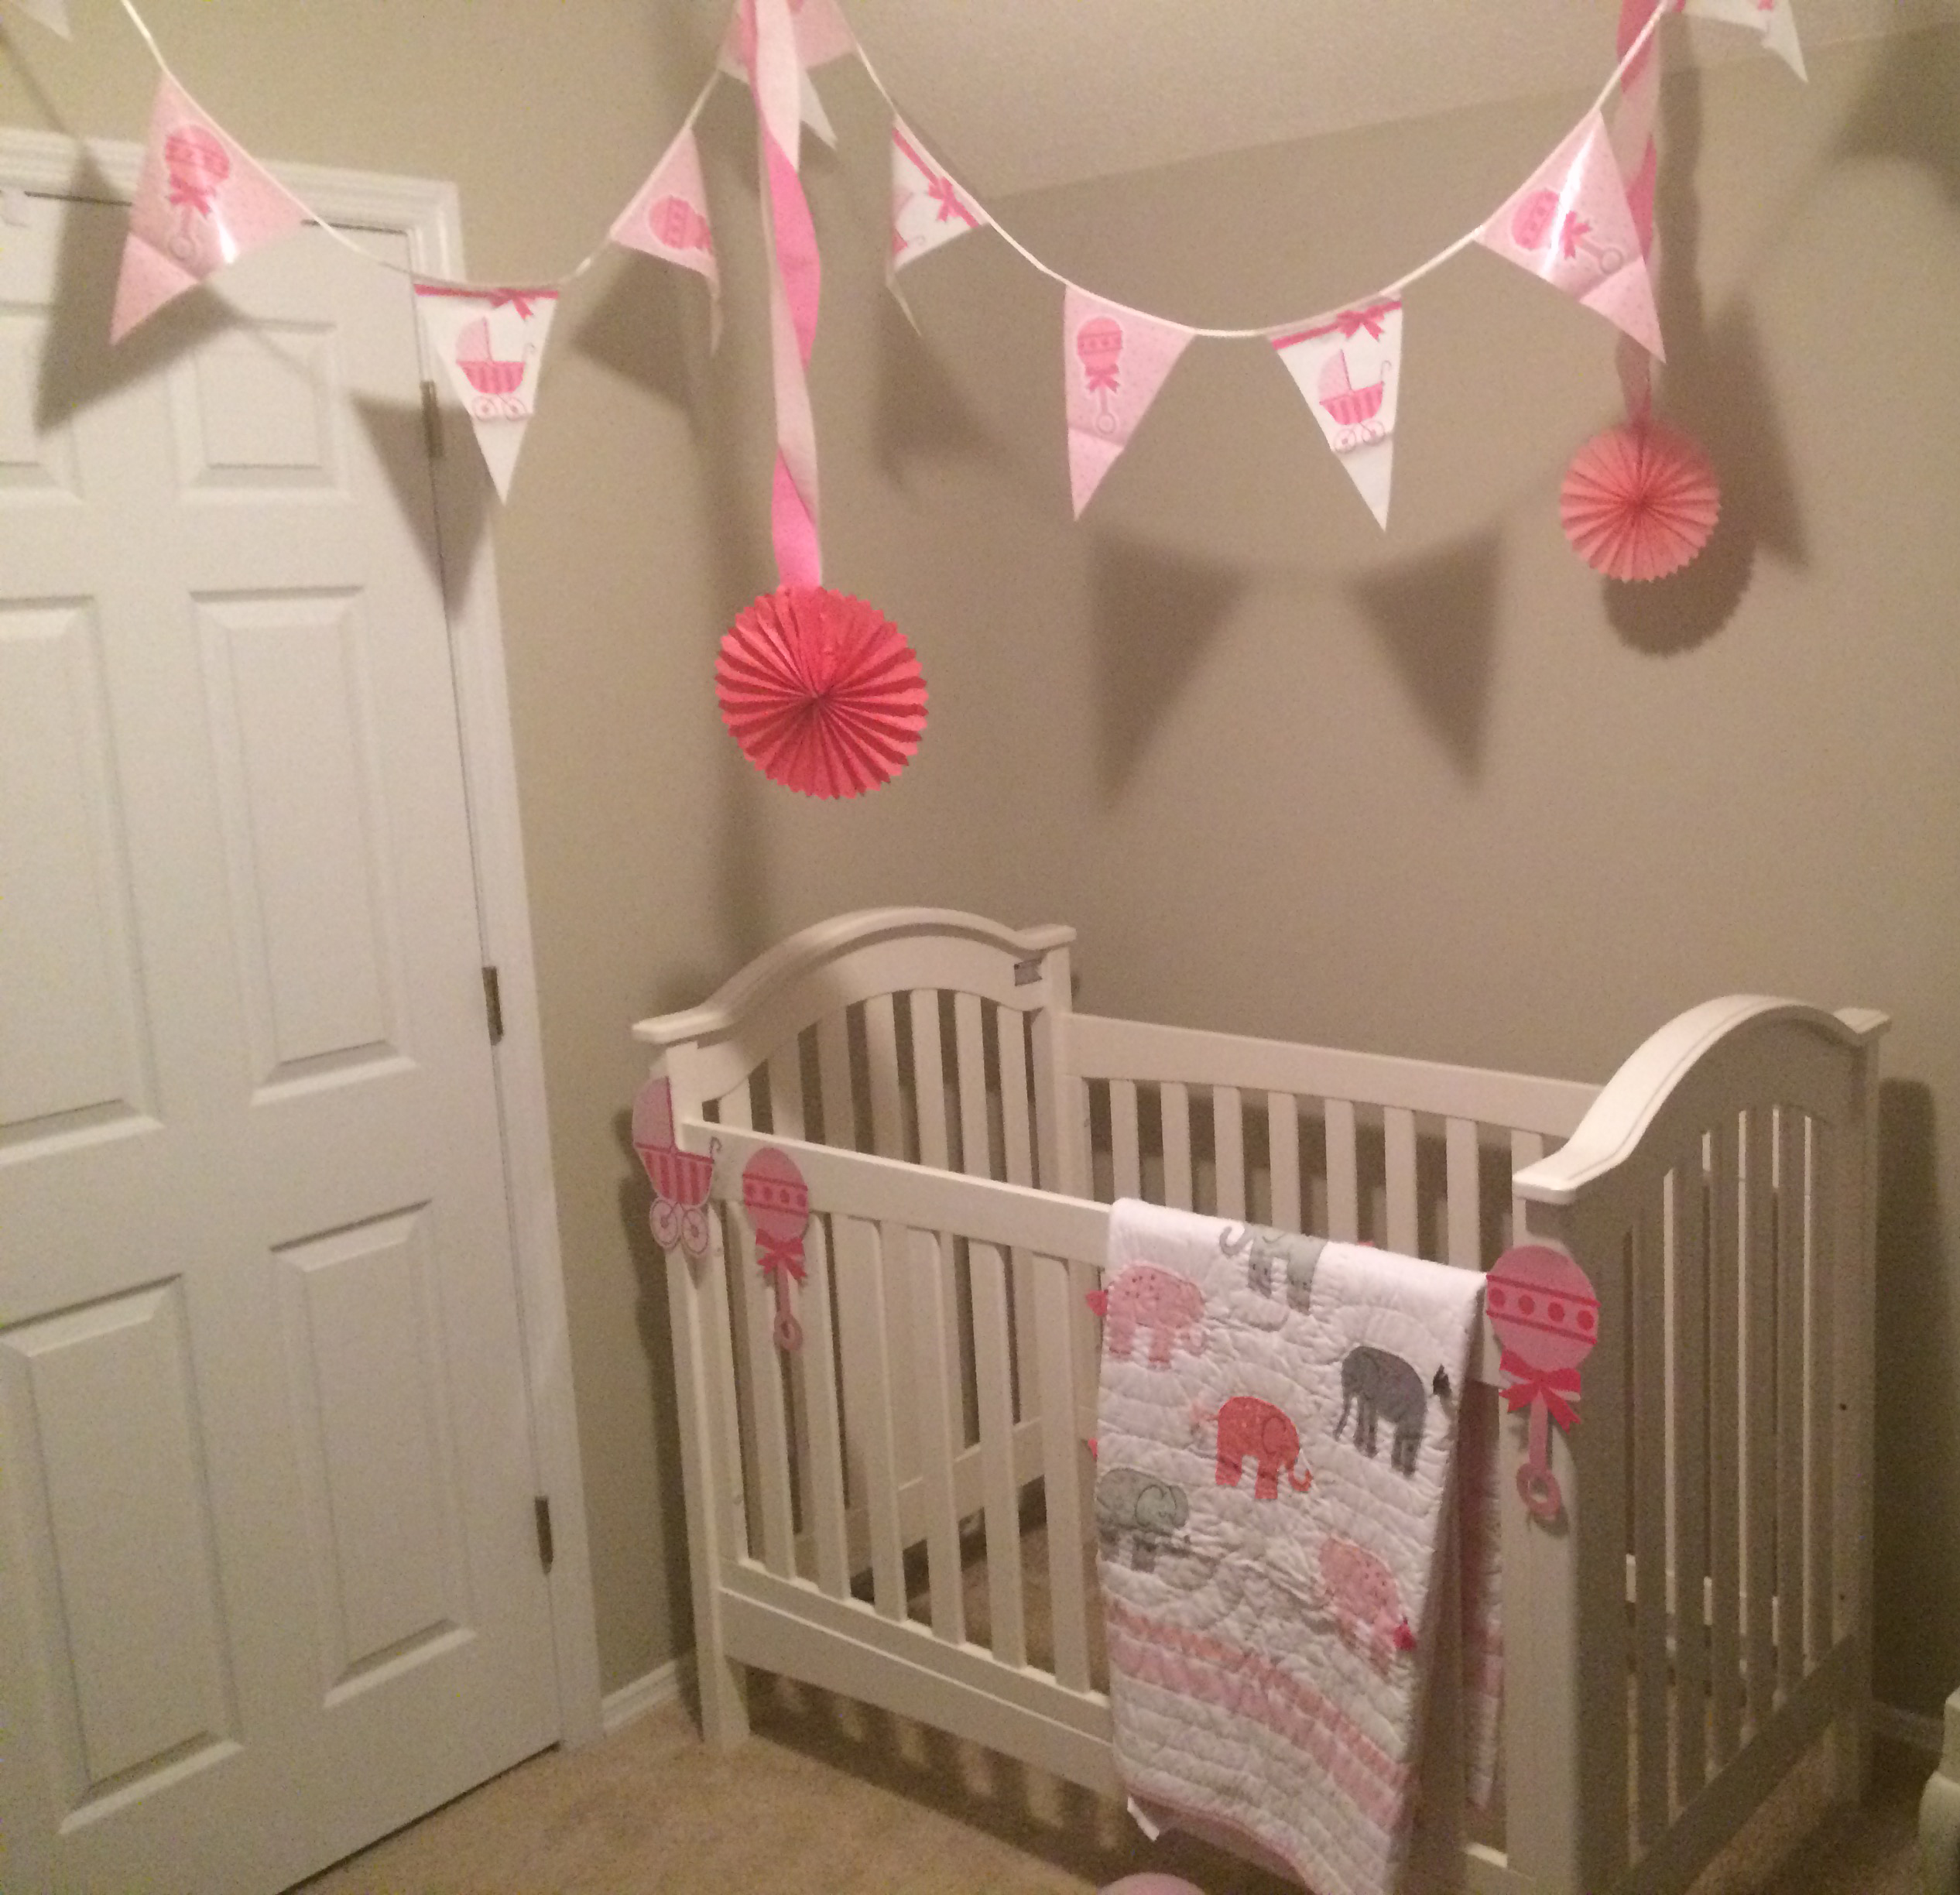 We will soon be blessed with a baby daughter. We can't wait to start creating our nursery.